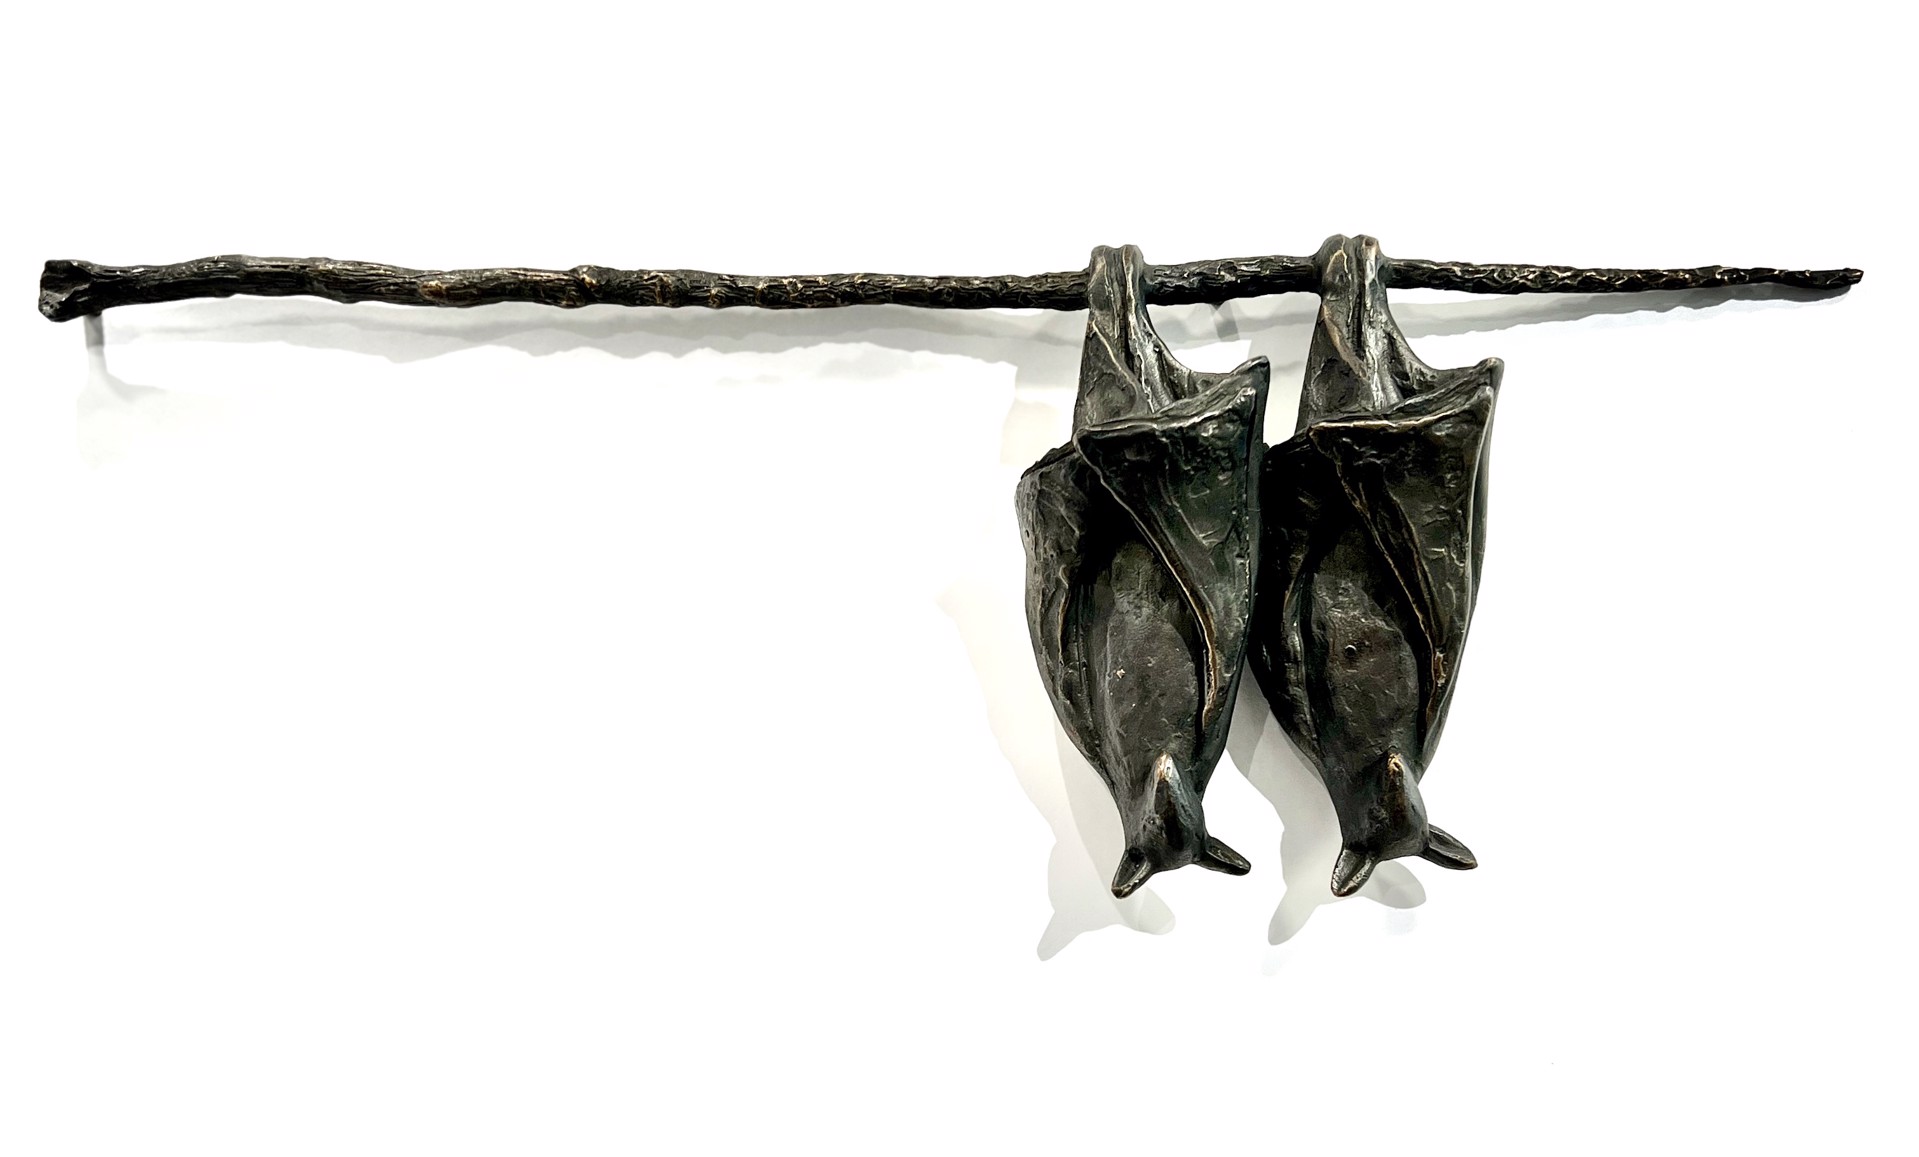 Pair of Bats on a Branch by Copper Tritscheller